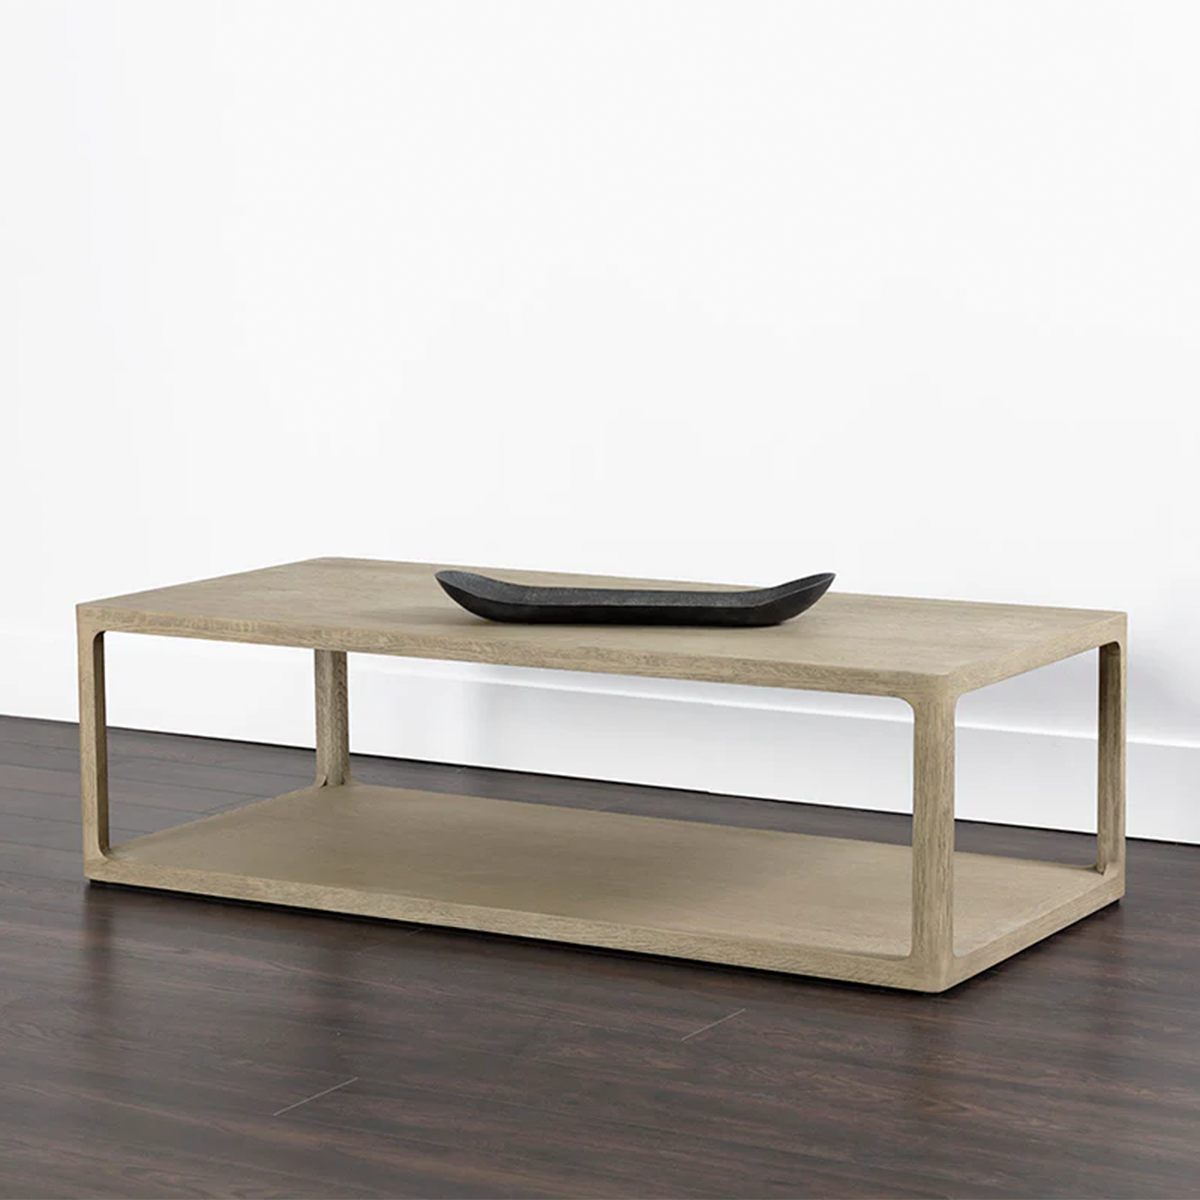 Doncaster Coffee Table by Sunpan White Background